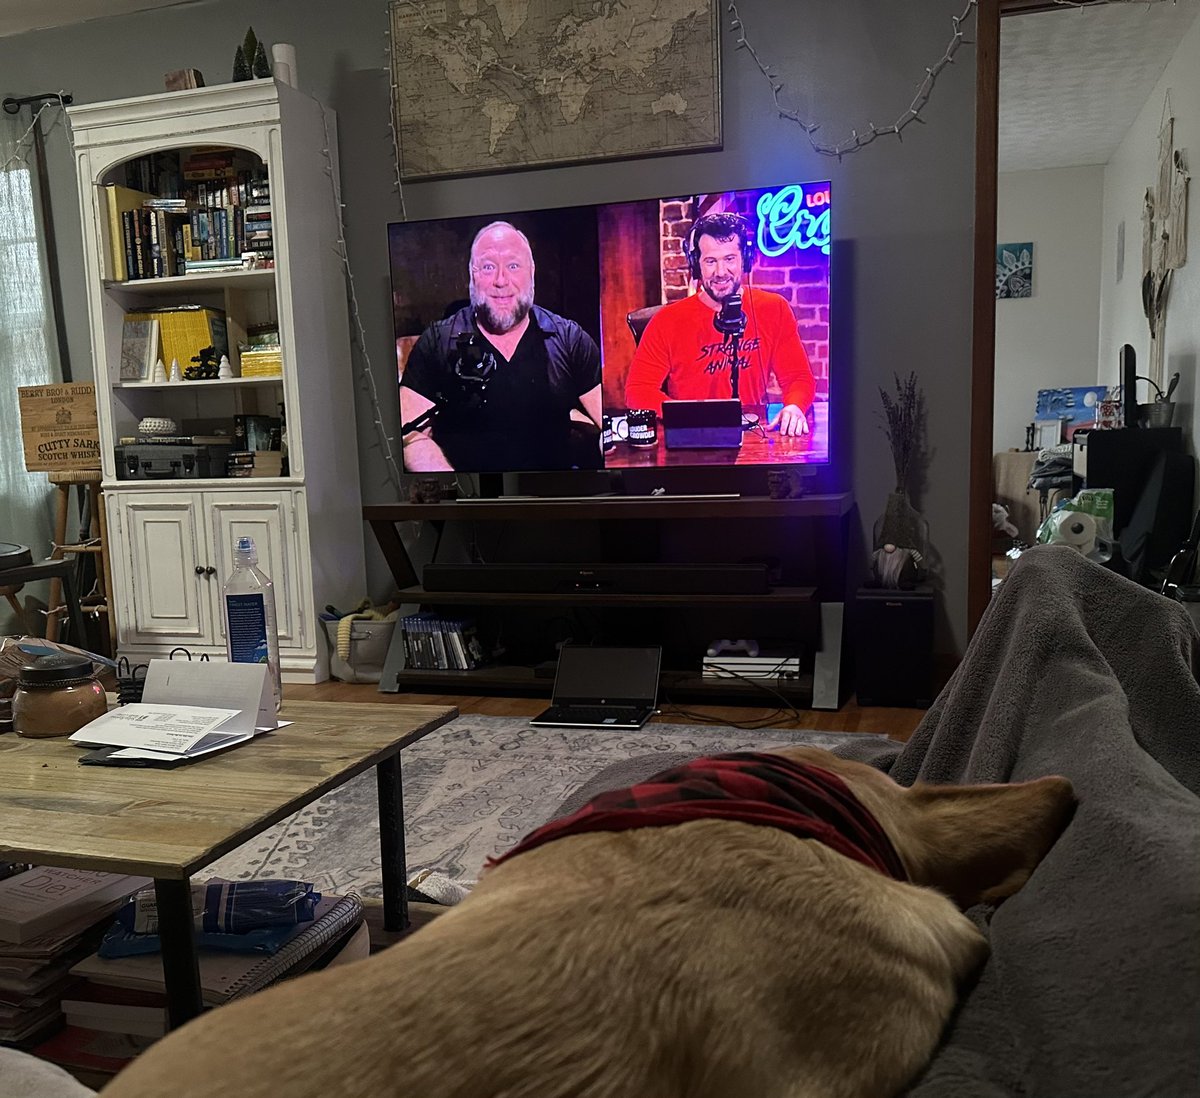 How Nala (aka booger, aka dipshit, aka crackhead, aka diva pup) and I watch Louder with Crowder every day! Welcome back! Nala would love to see more of her boyfriend Joe Louis though. Let’s go! #HowIWatchCrowder #TheBoysAreBack #MAGA #GayFrogs #LouderWithCrowder #MorningSlurp